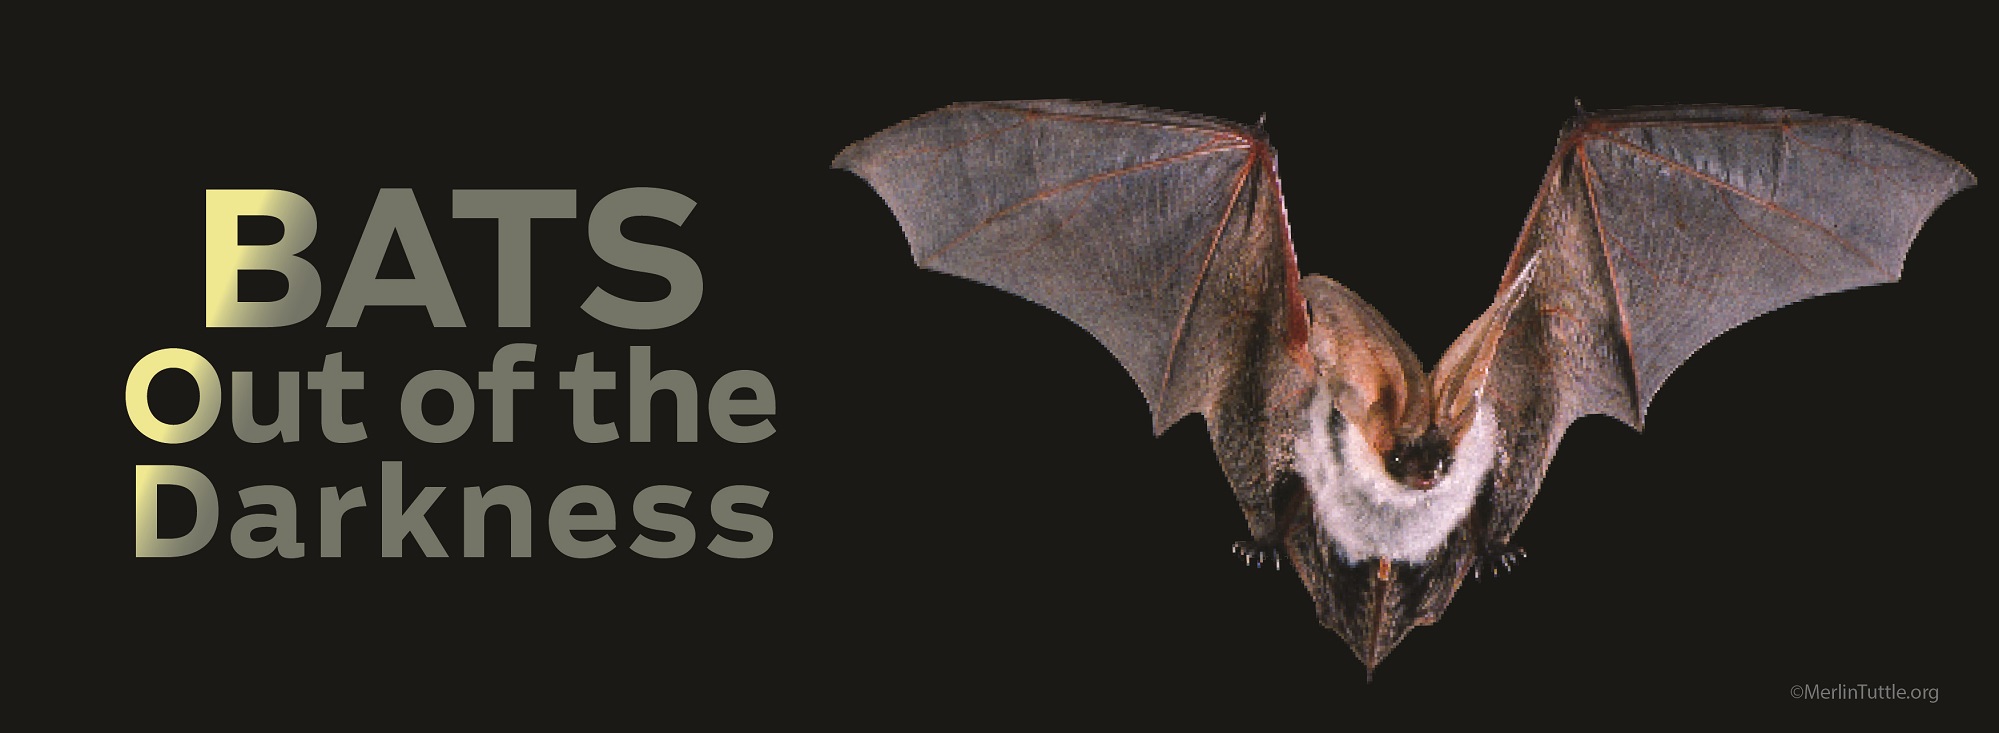 The Bats are flying into Rossland - New Travelling Exhibit  at the Rossland Museum